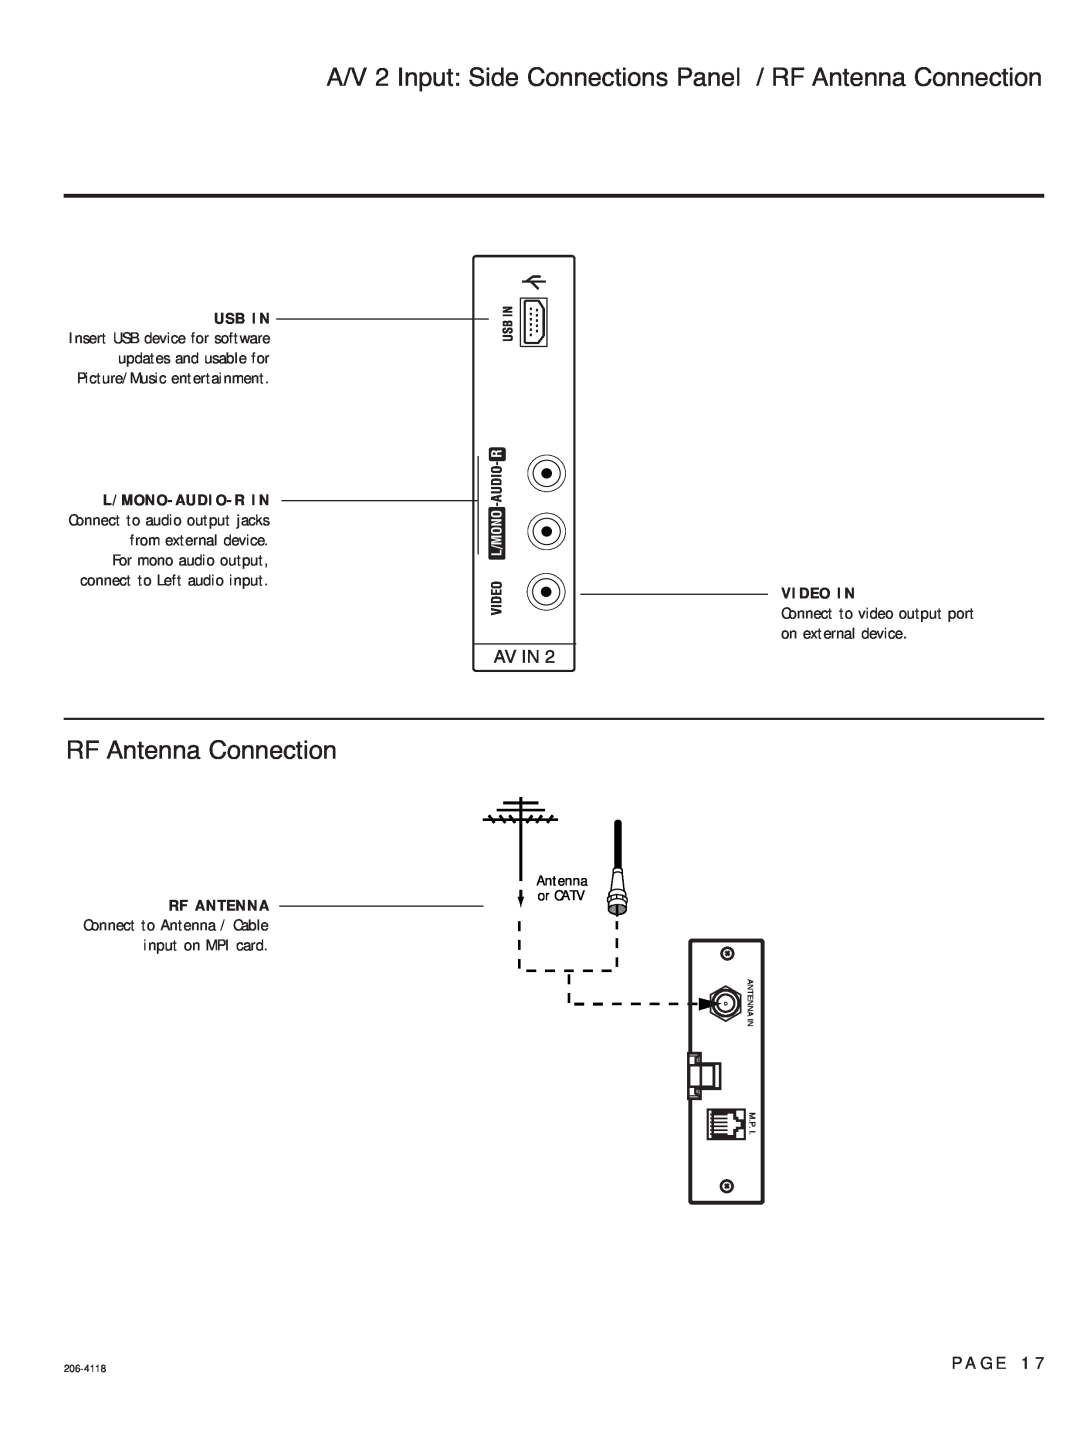 LG Electronics 37LH265H A/V 2 Input Side Connections Panel / RF Antenna Connection, Video In, Video L/Mono -Audio- R 